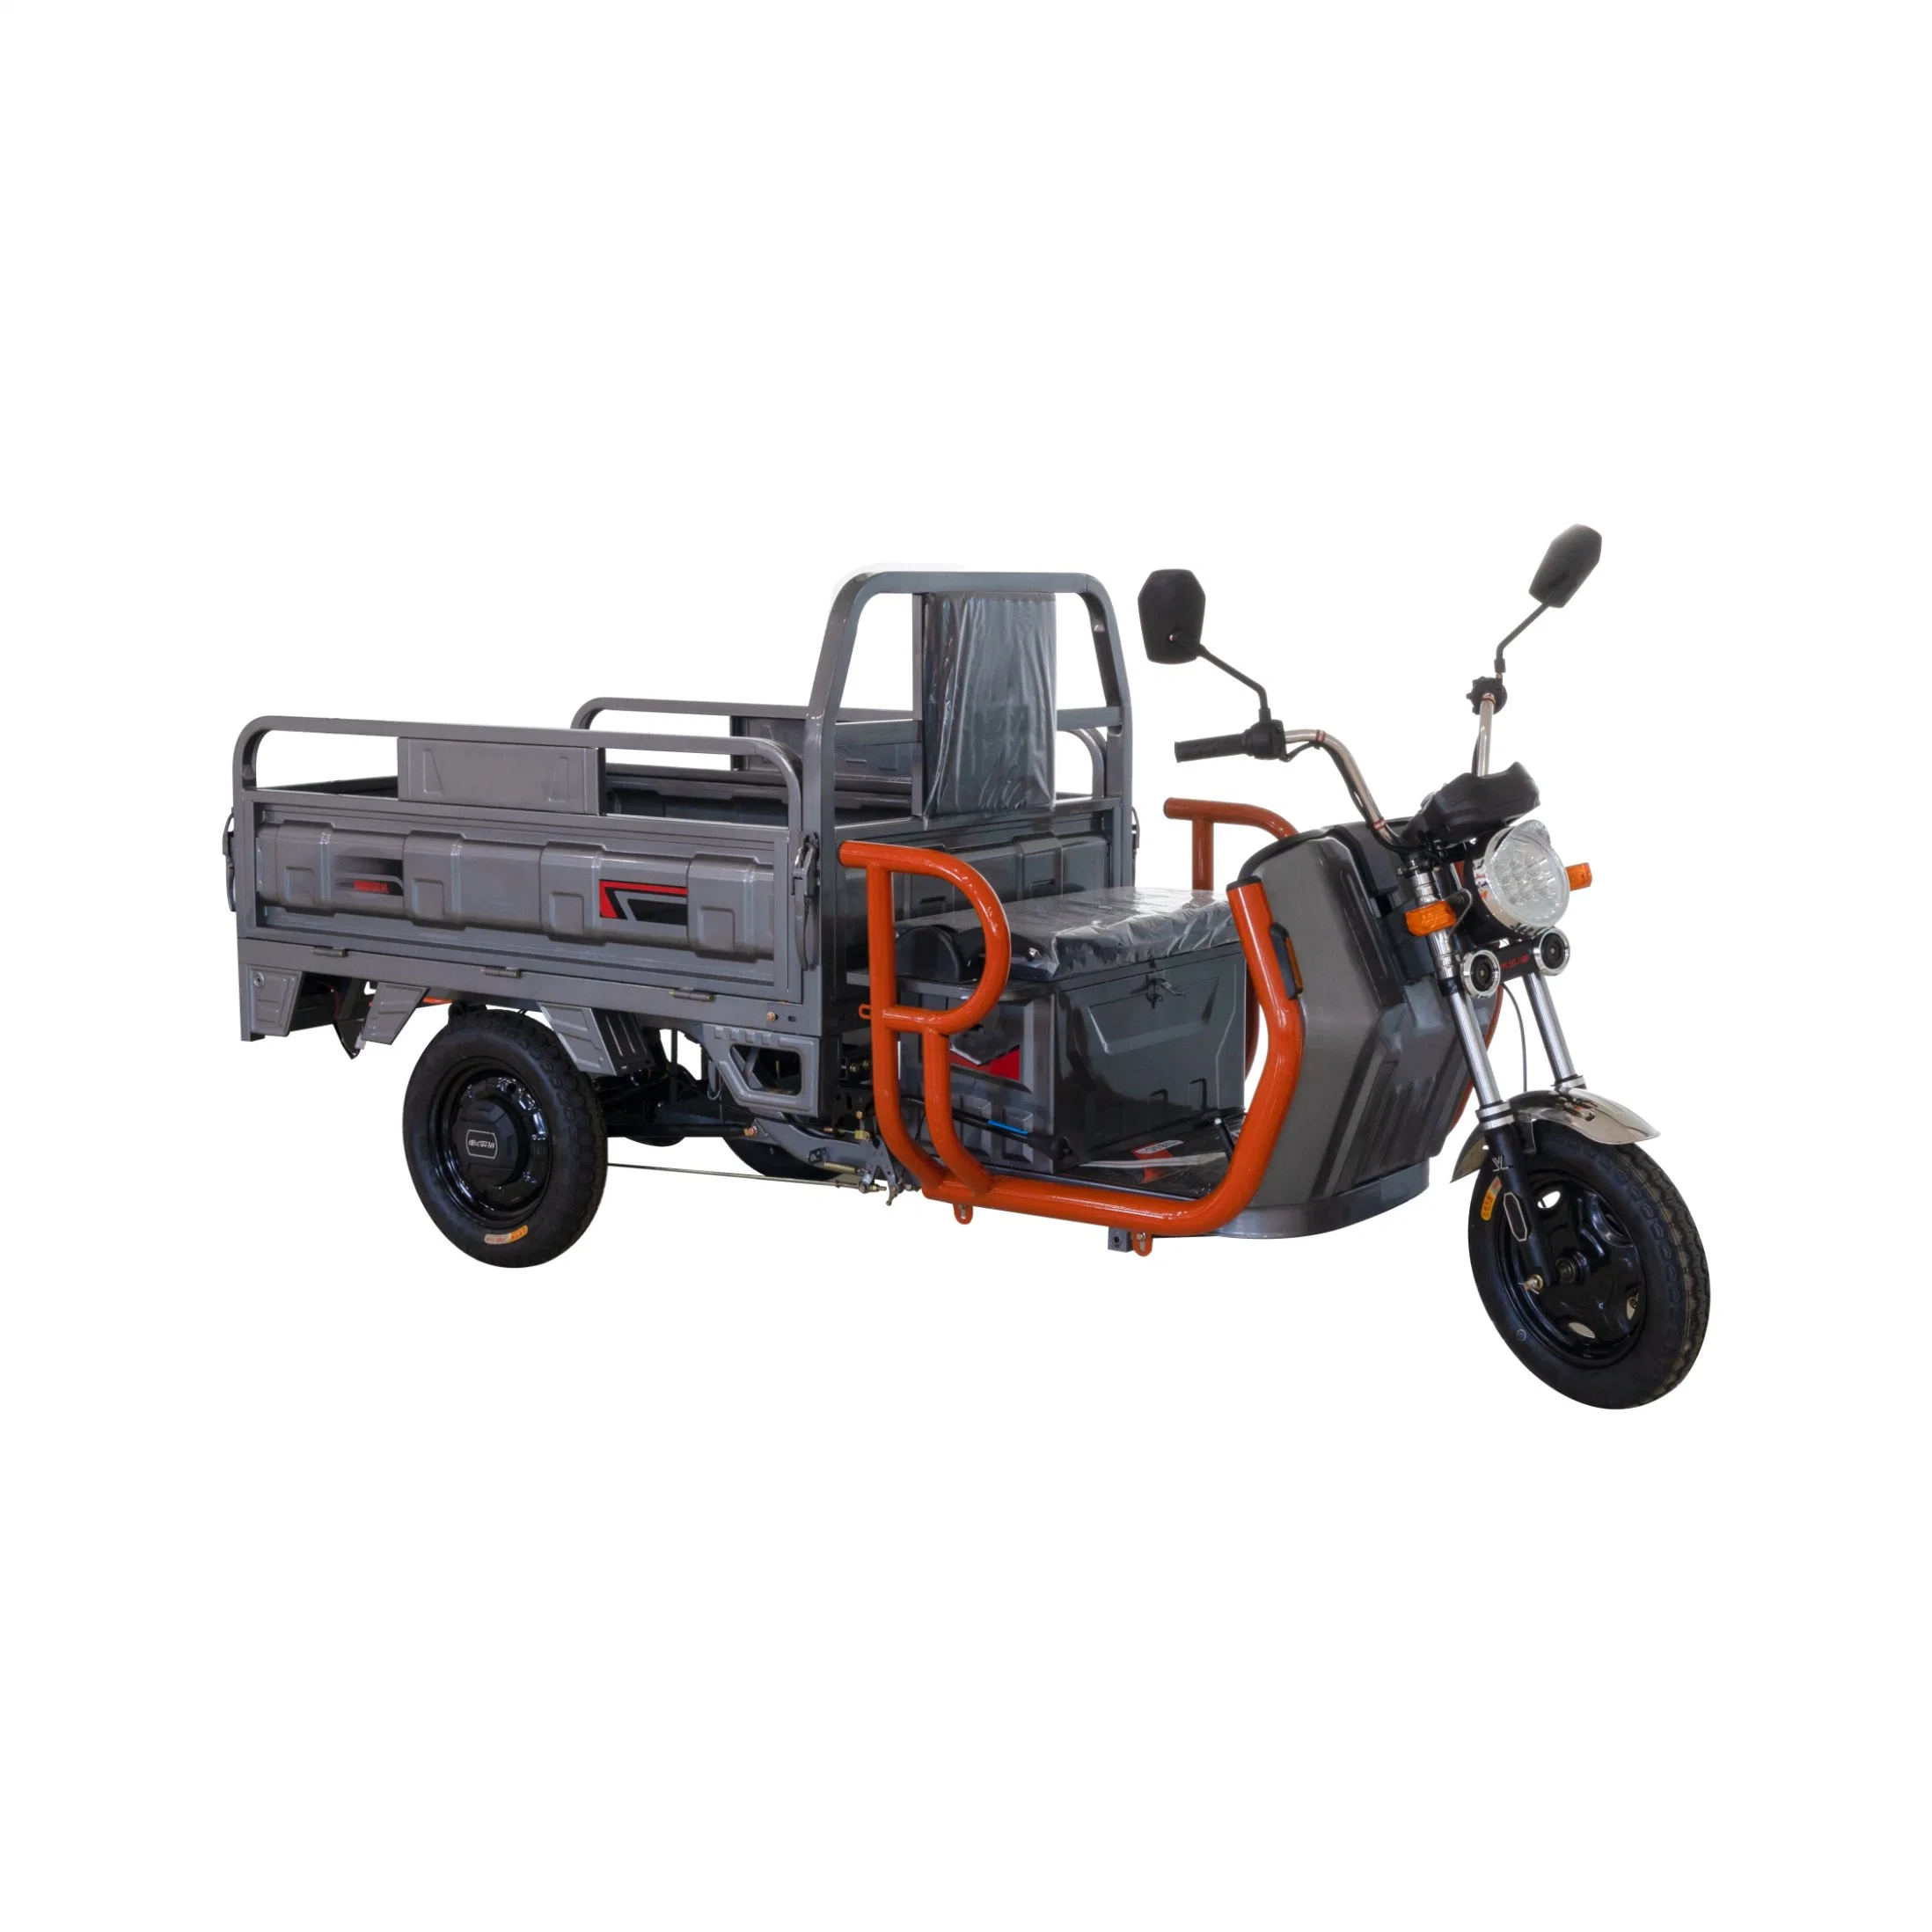 MID Asia Market Agricultural Tricycle Turkey Bike Cargo Scooter 3 Wheel Adult Three Wheels Volta for Electric Tricycles